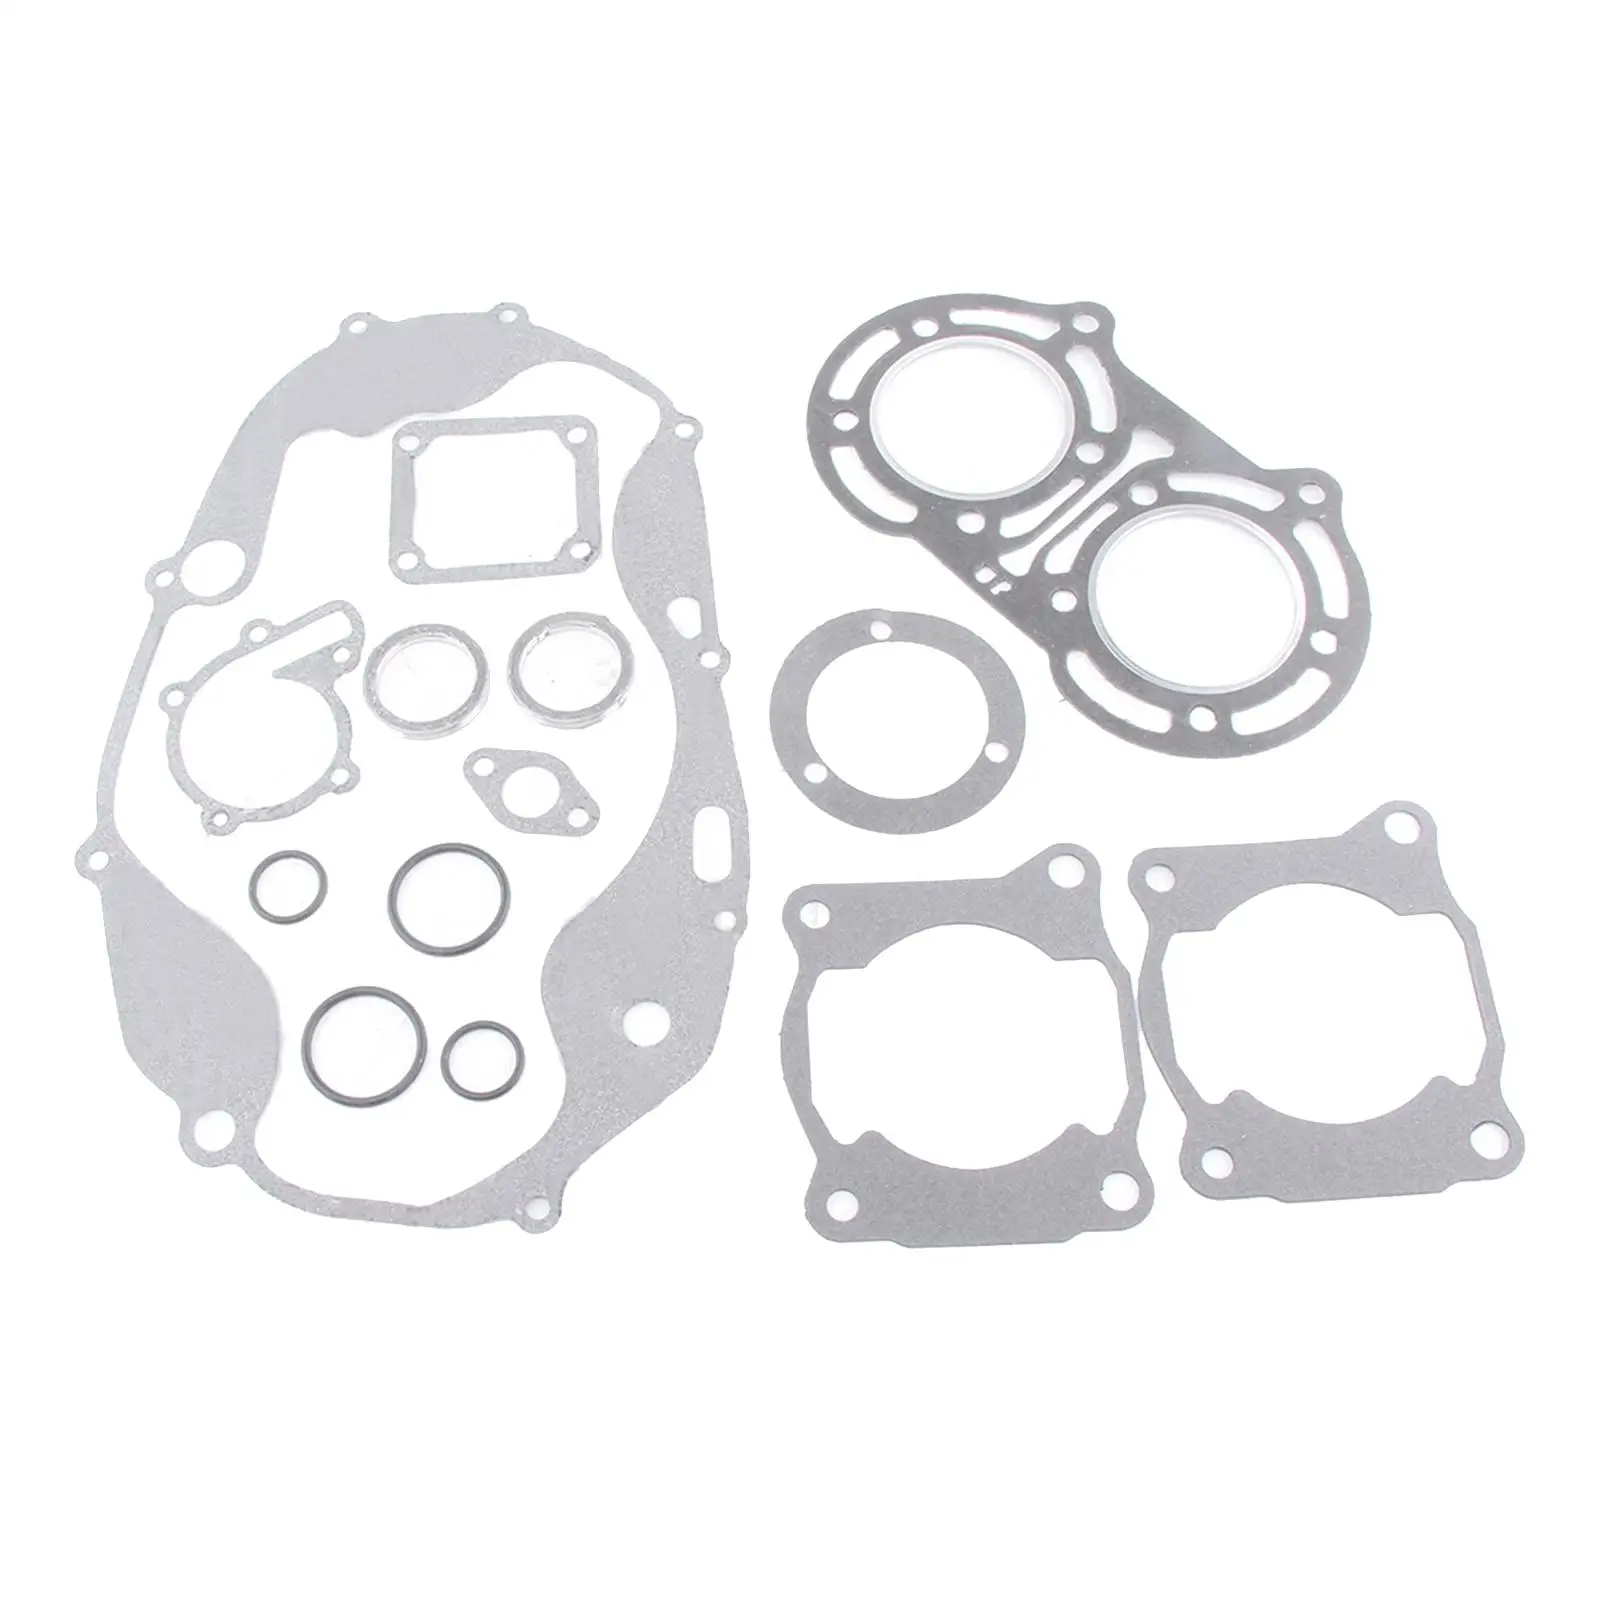 New Replacement   Engine Gasket, Full Set, for  ATV